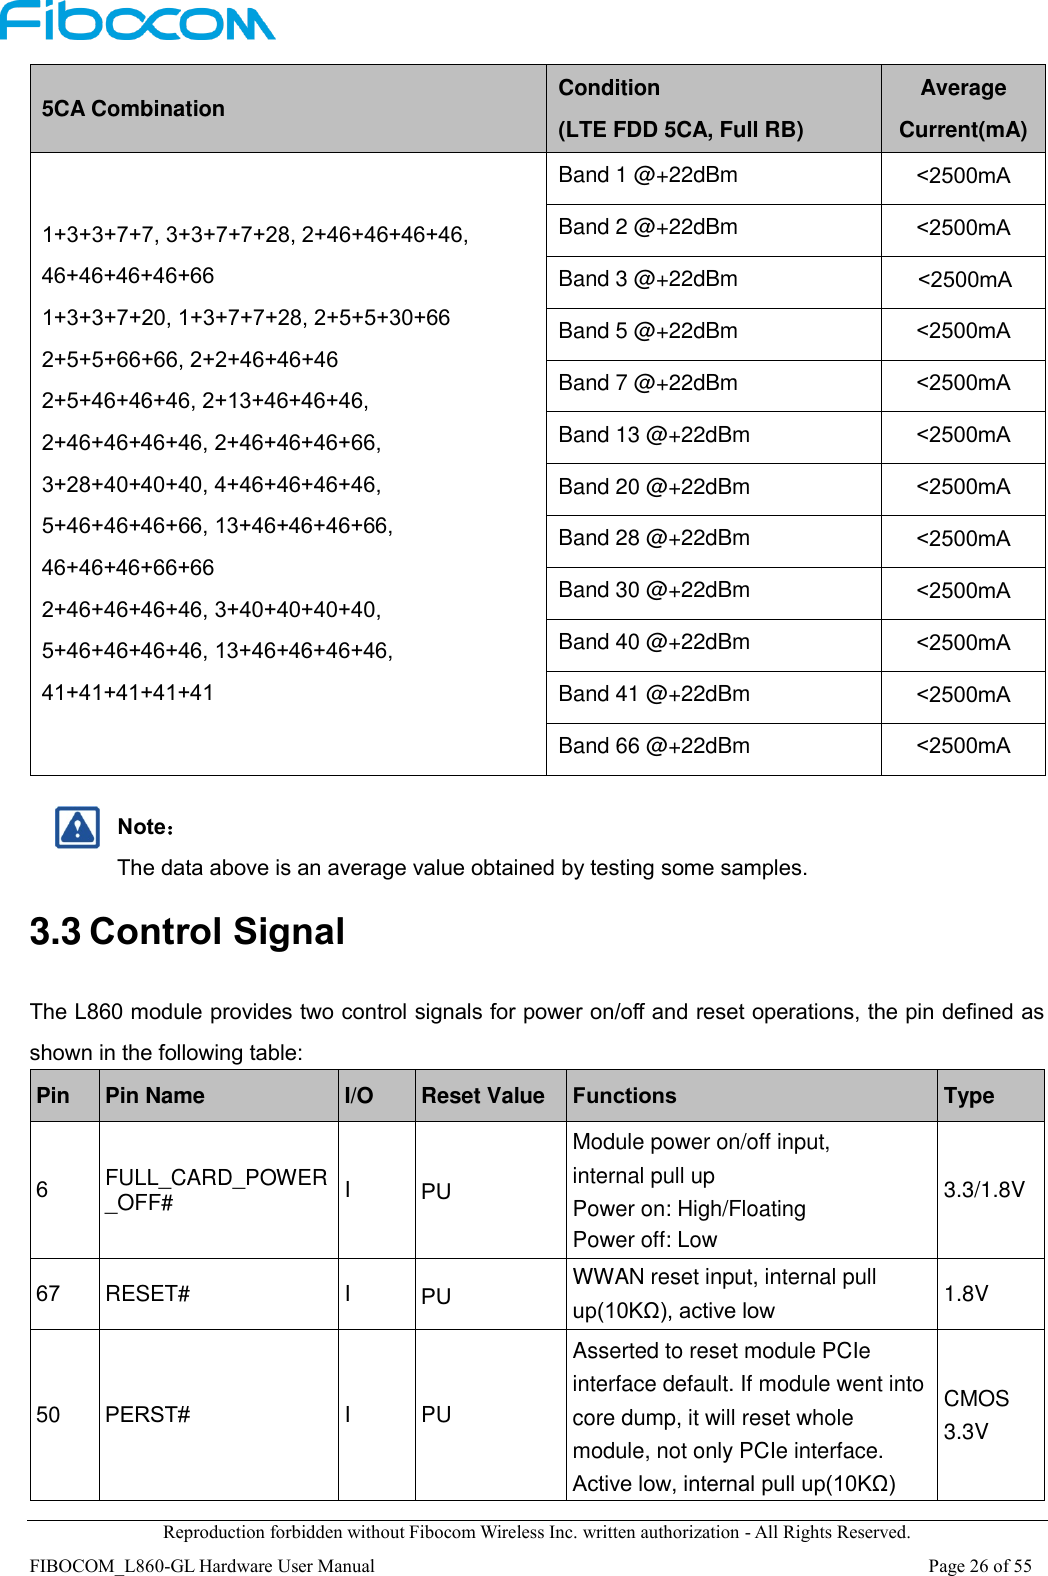  Reproduction forbidden without Fibocom Wireless Inc. written authorization - All Rights Reserved. FIBOCOM_L860-GL Hardware User Manual                                                                                                                      Page 26 of 55 5CA Combination Condition (LTE FDD 5CA, Full RB) Average Current(mA) 1+3+3+7+7, 3+3+7+7+28, 2+46+46+46+46, 46+46+46+46+66 1+3+3+7+20, 1+3+7+7+28, 2+5+5+30+66 2+5+5+66+66, 2+2+46+46+46 2+5+46+46+46, 2+13+46+46+46, 2+46+46+46+46, 2+46+46+46+66, 3+28+40+40+40, 4+46+46+46+46, 5+46+46+46+66, 13+46+46+46+66, 46+46+46+66+66 2+46+46+46+46, 3+40+40+40+40, 5+46+46+46+46, 13+46+46+46+46, 41+41+41+41+41 Band 1 @+22dBm &lt;2500mA Band 2 @+22dBm &lt;2500mA Band 3 @+22dBm  &lt;2500mA Band 5 @+22dBm &lt;2500mA Band 7 @+22dBm &lt;2500mA Band 13 @+22dBm &lt;2500mA Band 20 @+22dBm &lt;2500mA Band 28 @+22dBm &lt;2500mA Band 30 @+22dBm &lt;2500mA Band 40 @+22dBm &lt;2500mA Band 41 @+22dBm &lt;2500mA Band 66 @+22dBm &lt;2500mA  Note： The data above is an average value obtained by testing some samples. 3.3 Control Signal The L860 module provides two control signals for power on/off and reset operations, the pin defined as shown in the following table: Pin Pin Name I/O Reset Value Functions Type 6 FULL_CARD_POWER_OFF# I PU Module power on/off input,   internal pull up Power on: High/Floating Power off: Low 3.3/1.8V 67 RESET# I PU WWAN reset input, internal pull up(10KΩ), active low 1.8V 50 PERST# I PU Asserted to reset module PCIe interface default. If module went into core dump, it will reset whole module, not only PCIe interface. Active low, internal pull up(10KΩ) CMOS 3.3V 